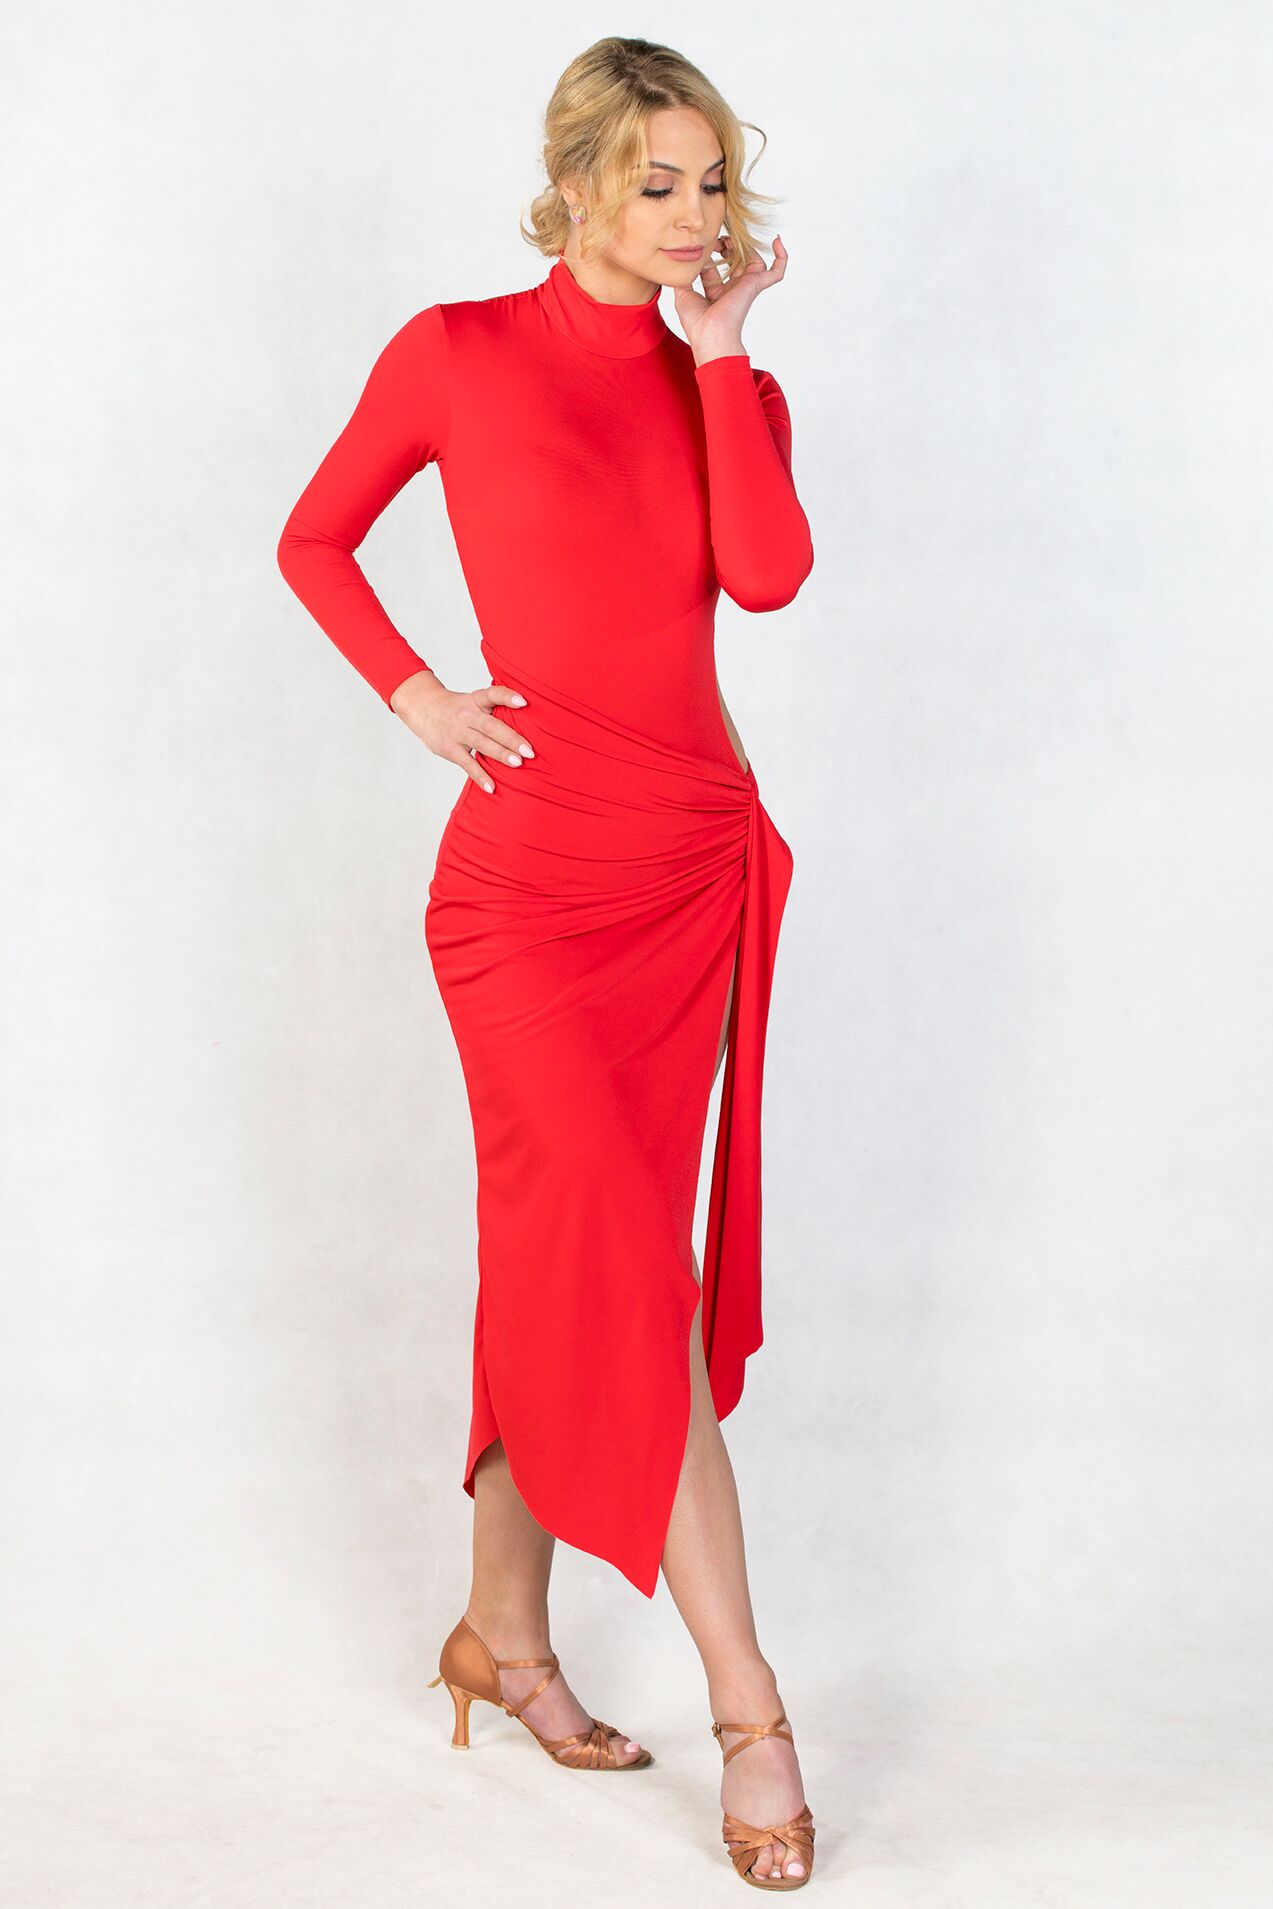 Zeta Red Latin dress with cut out hole